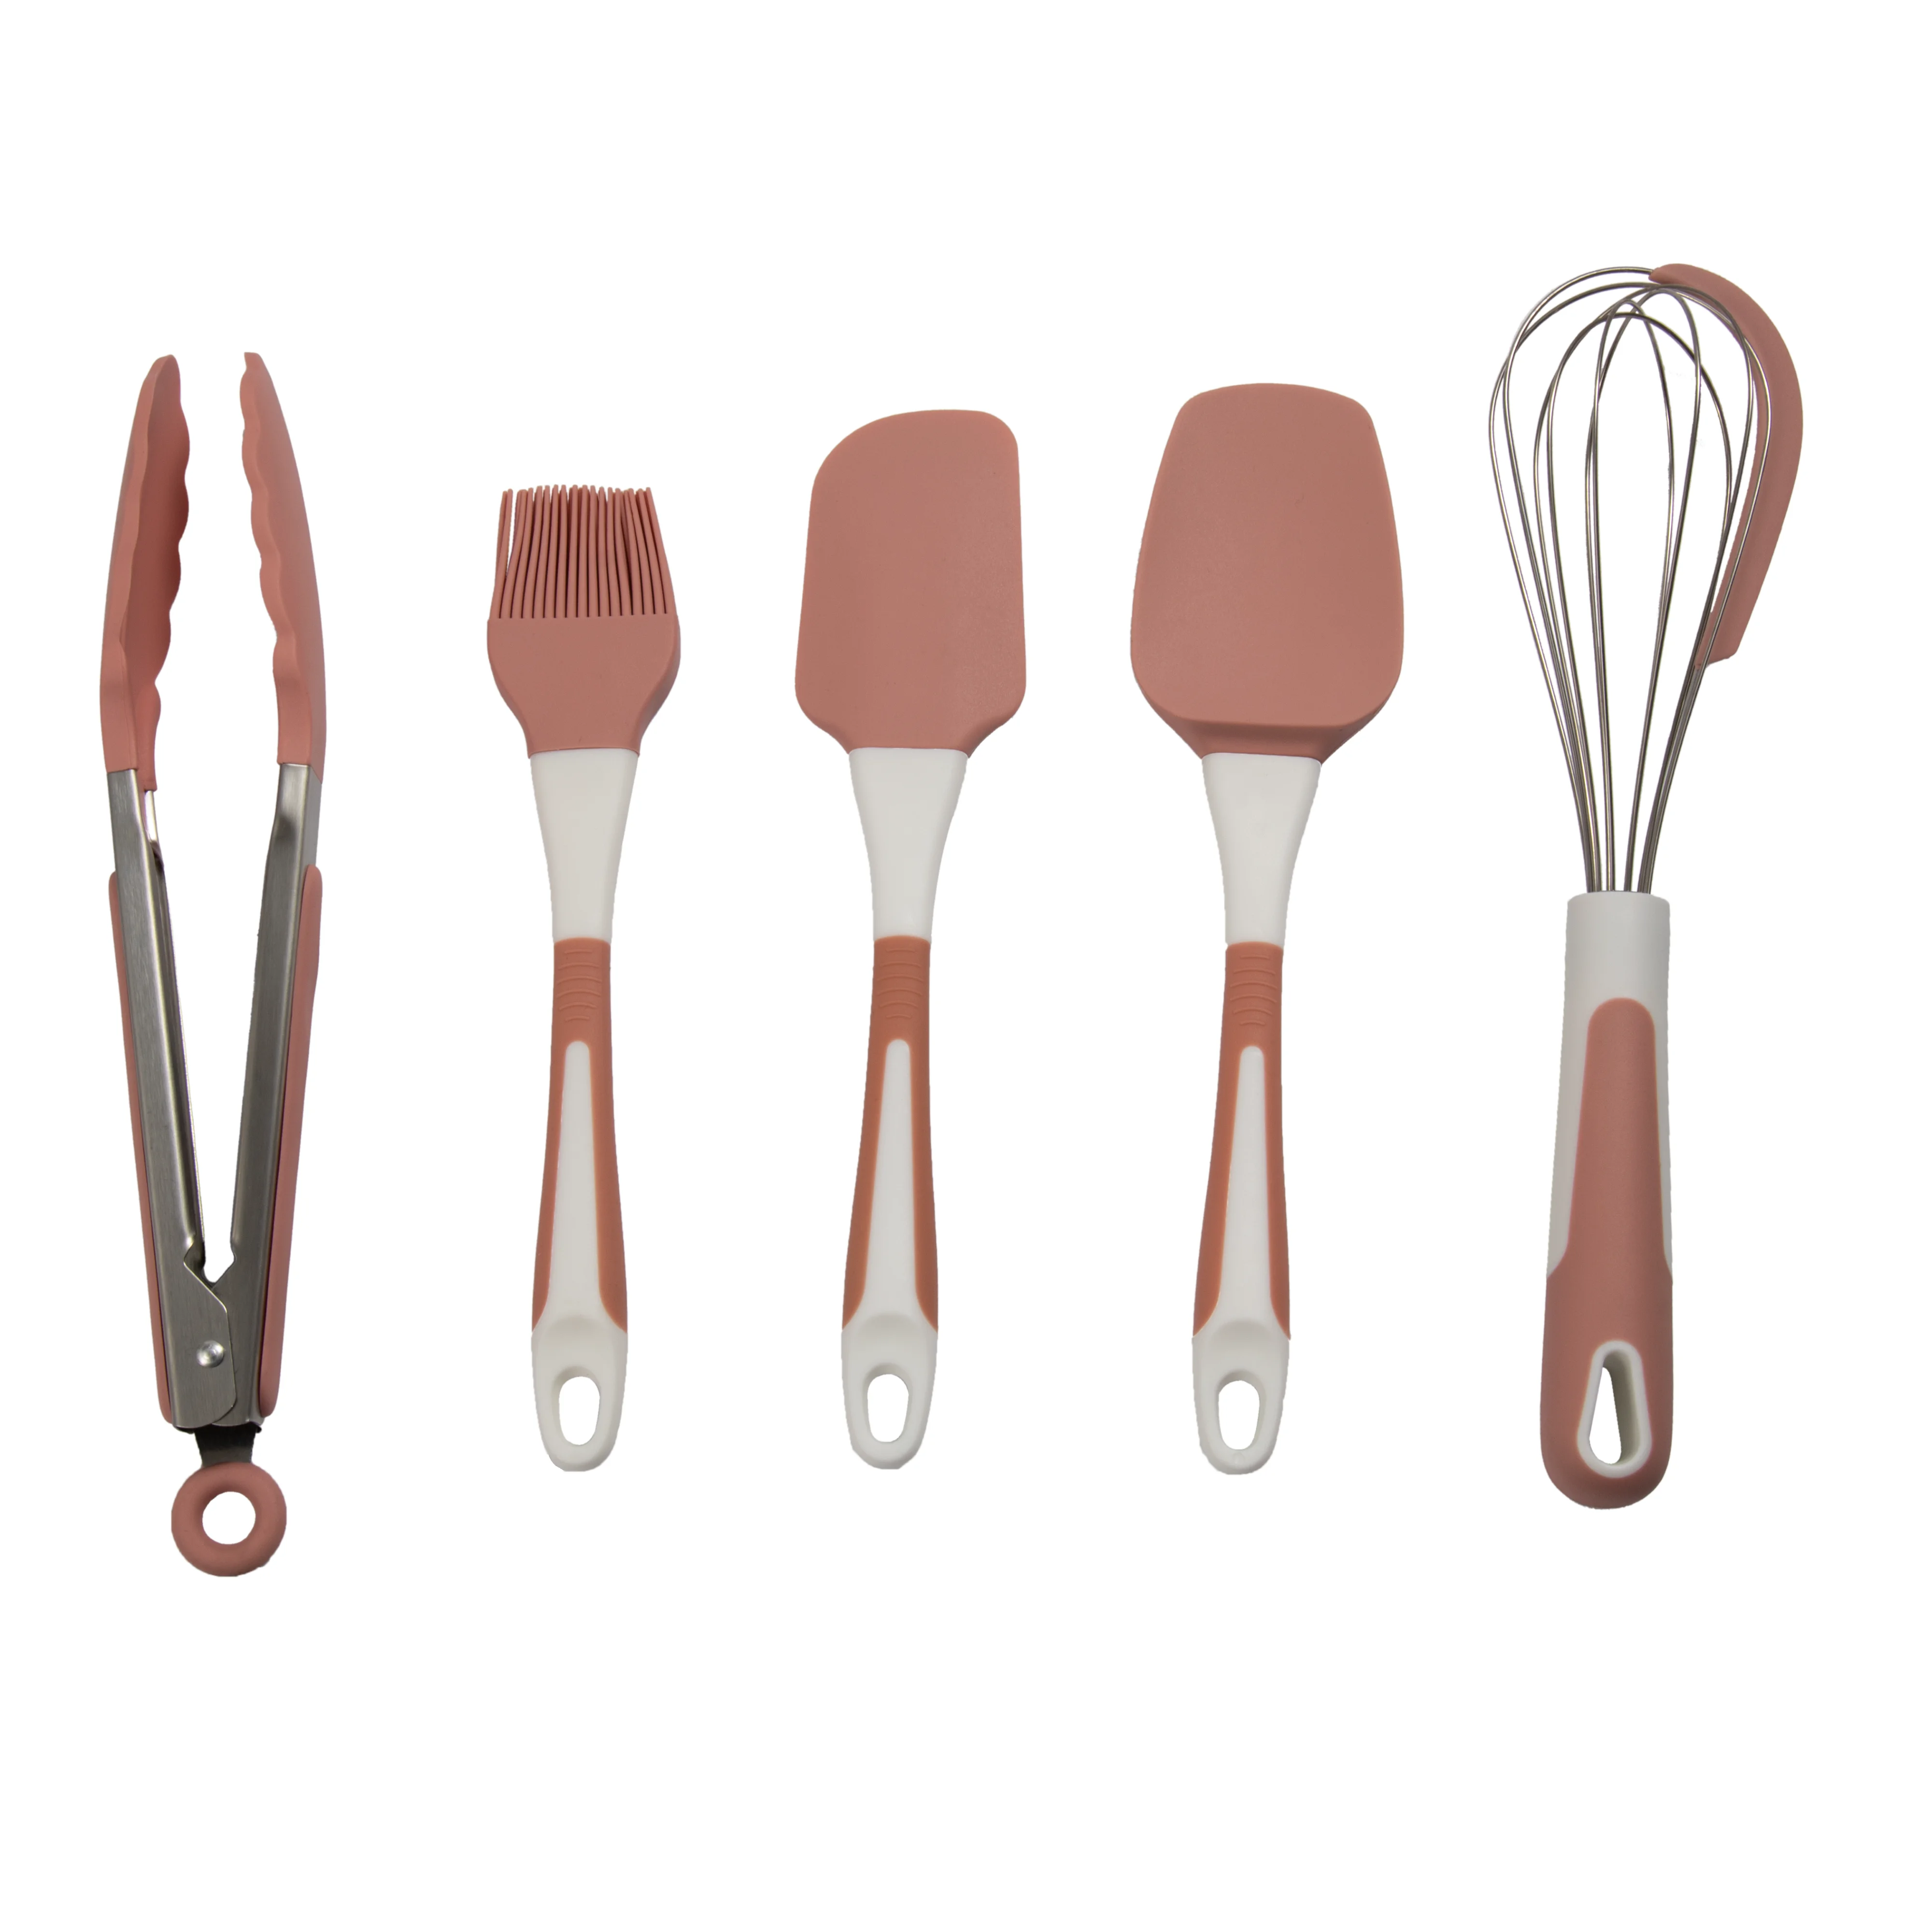 High Quality Non-Stick Silicone Multifunctional Baking Utensils Kitchen  Gadgets Tools Set